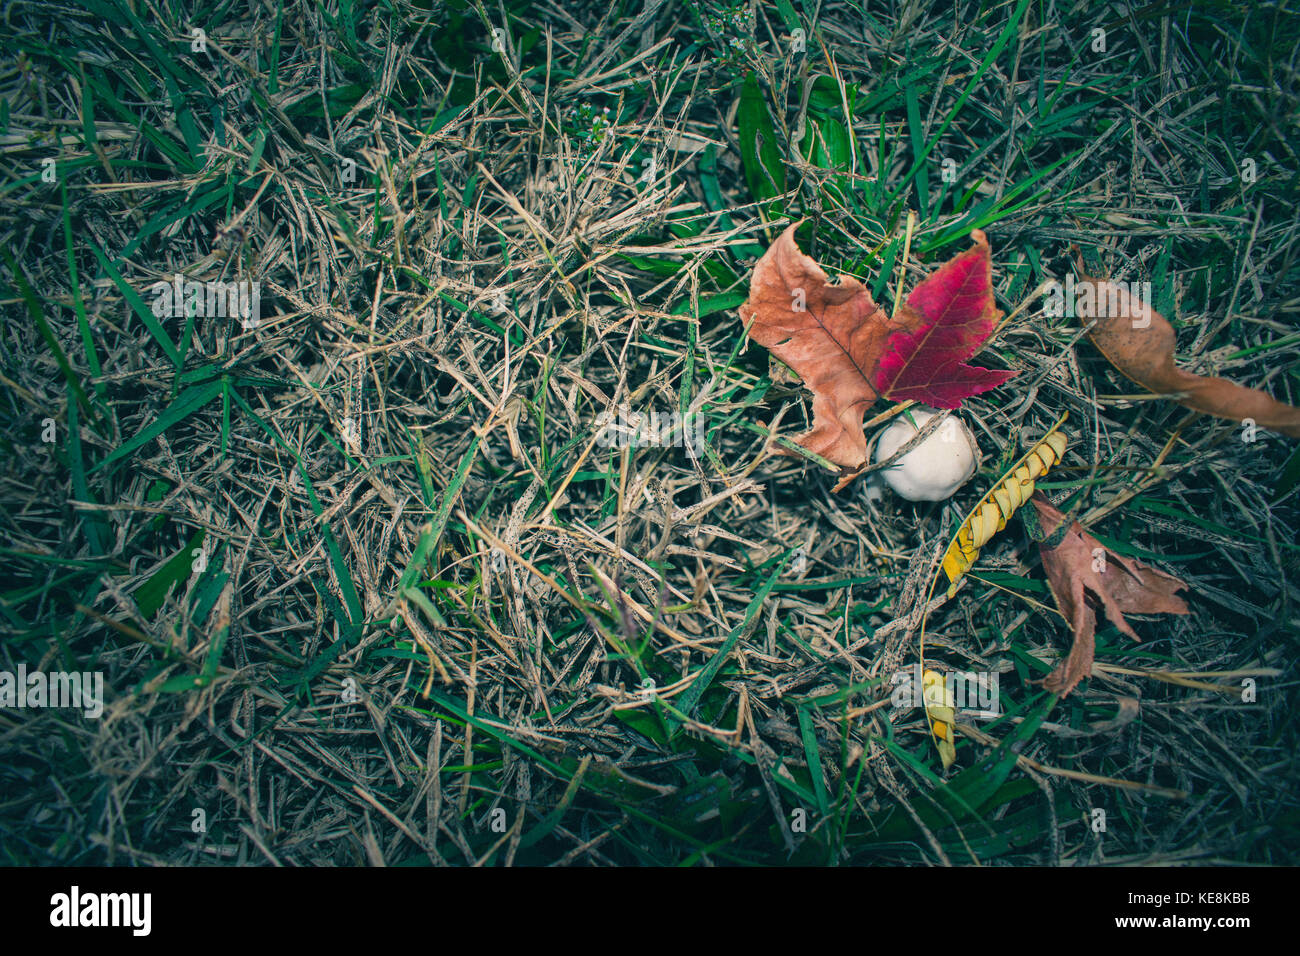 Abstract Photo Of Mushroom And Autumn Leaves In The Grass, Fall Stock Photo